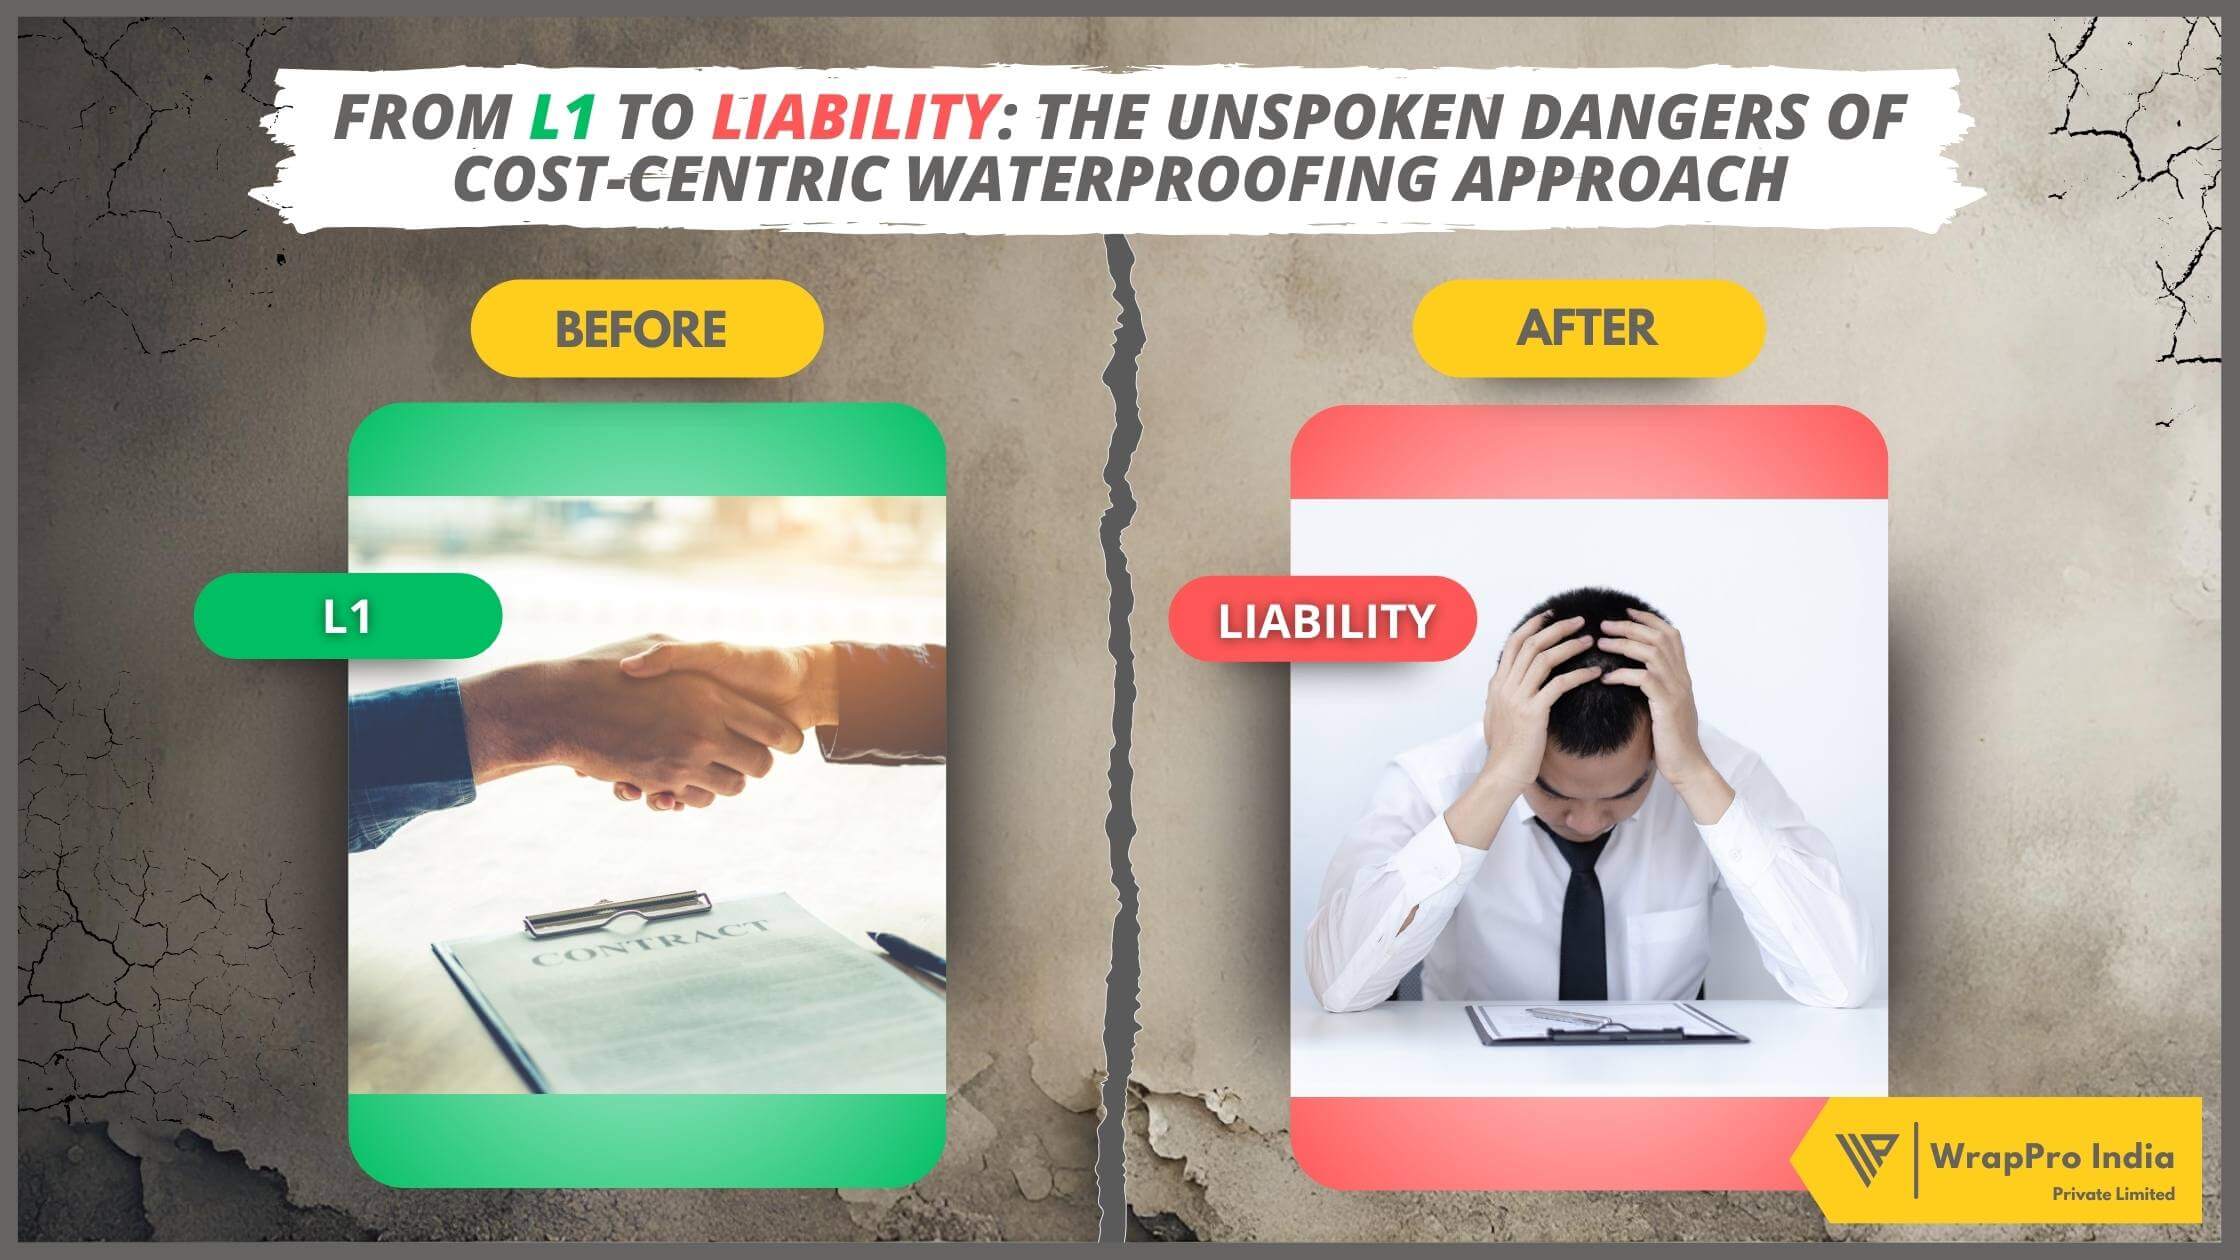 From L1 to Liability: The Unspoken Dangers of Cost-Centric Waterproofing Approach